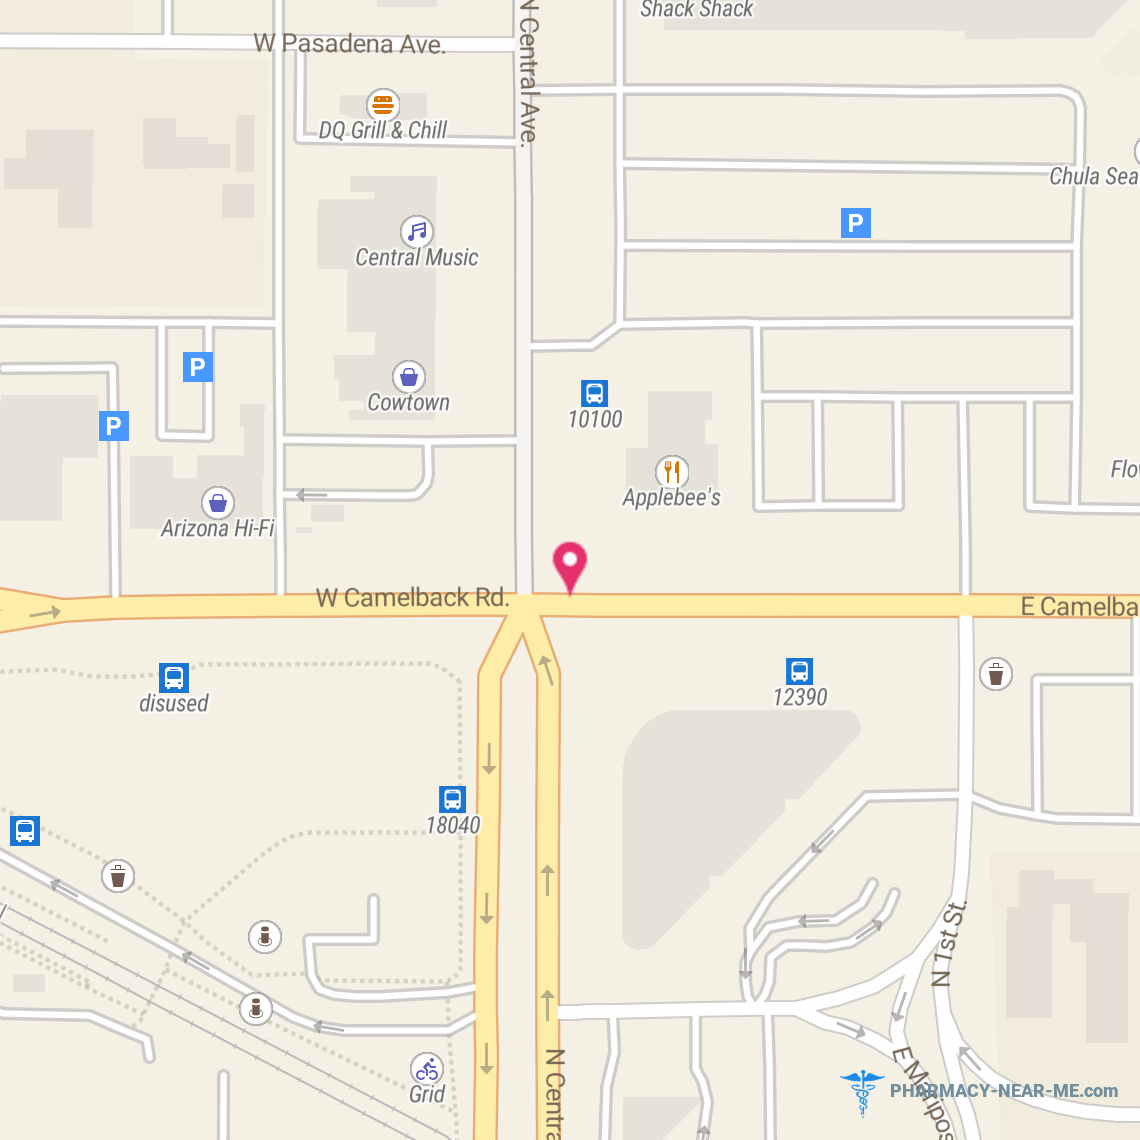 UPTOWN PHARMACY - Pharmacy Hours, Phone, Reviews & Information: N Central Ave, Phoenix, Arizona 85012, United States